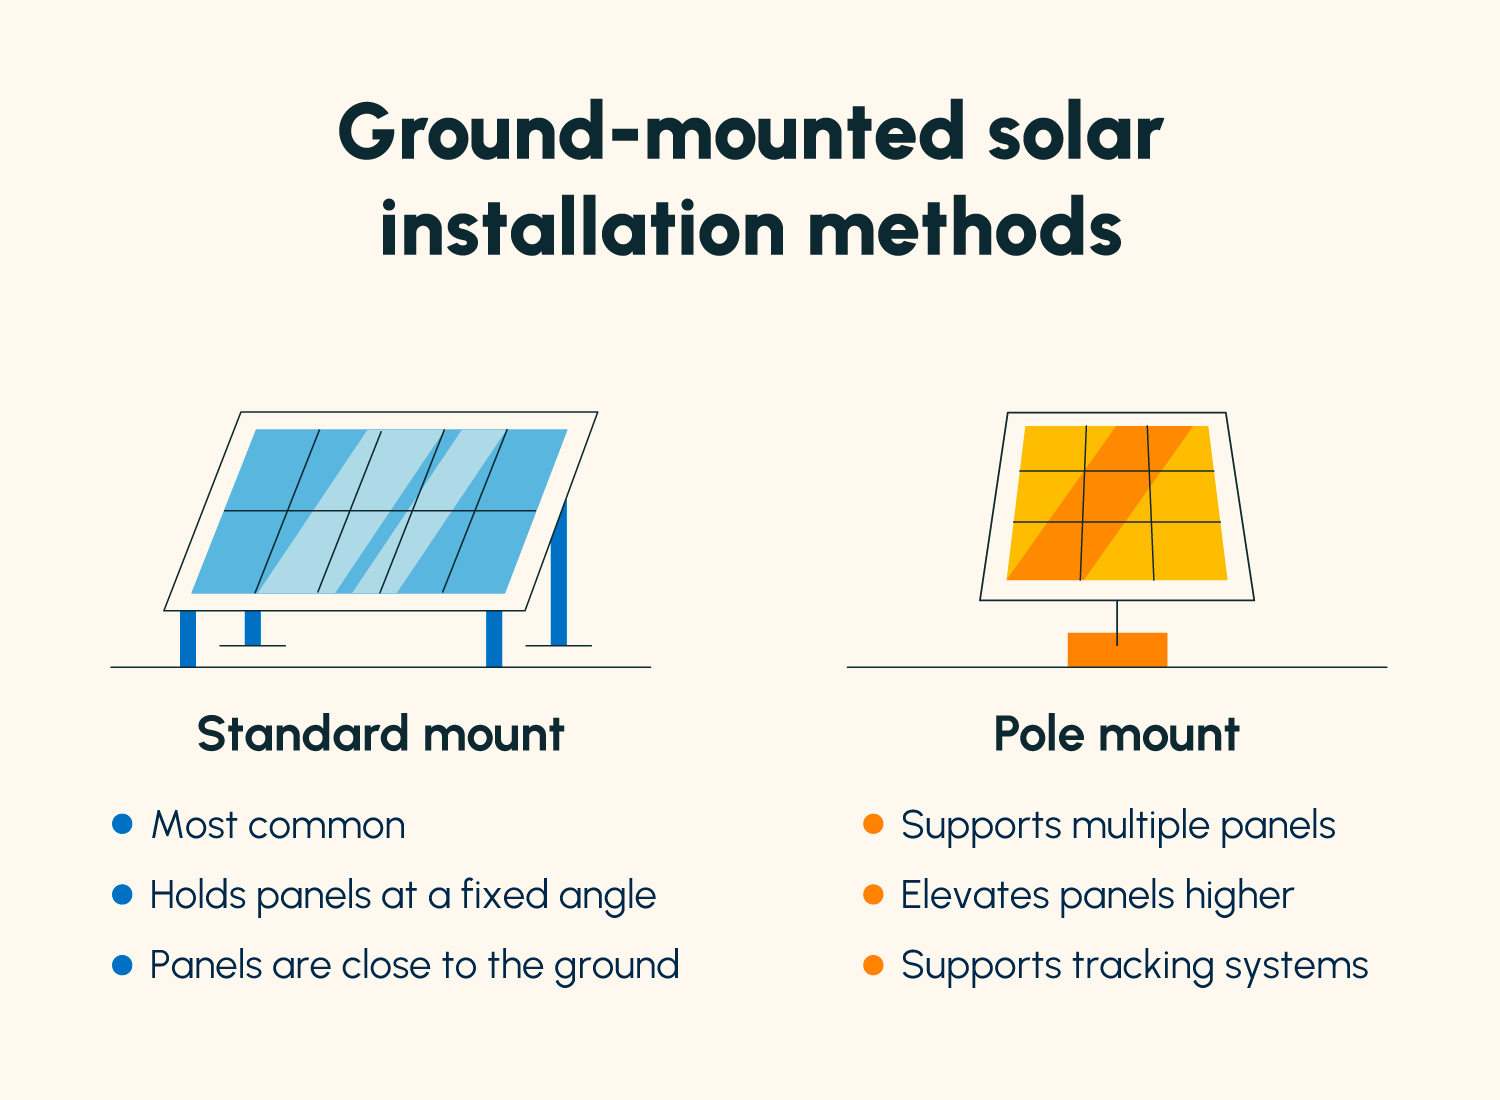 A comparison of the two ground-mounted solar panel installation methods: standard mount and pole mount